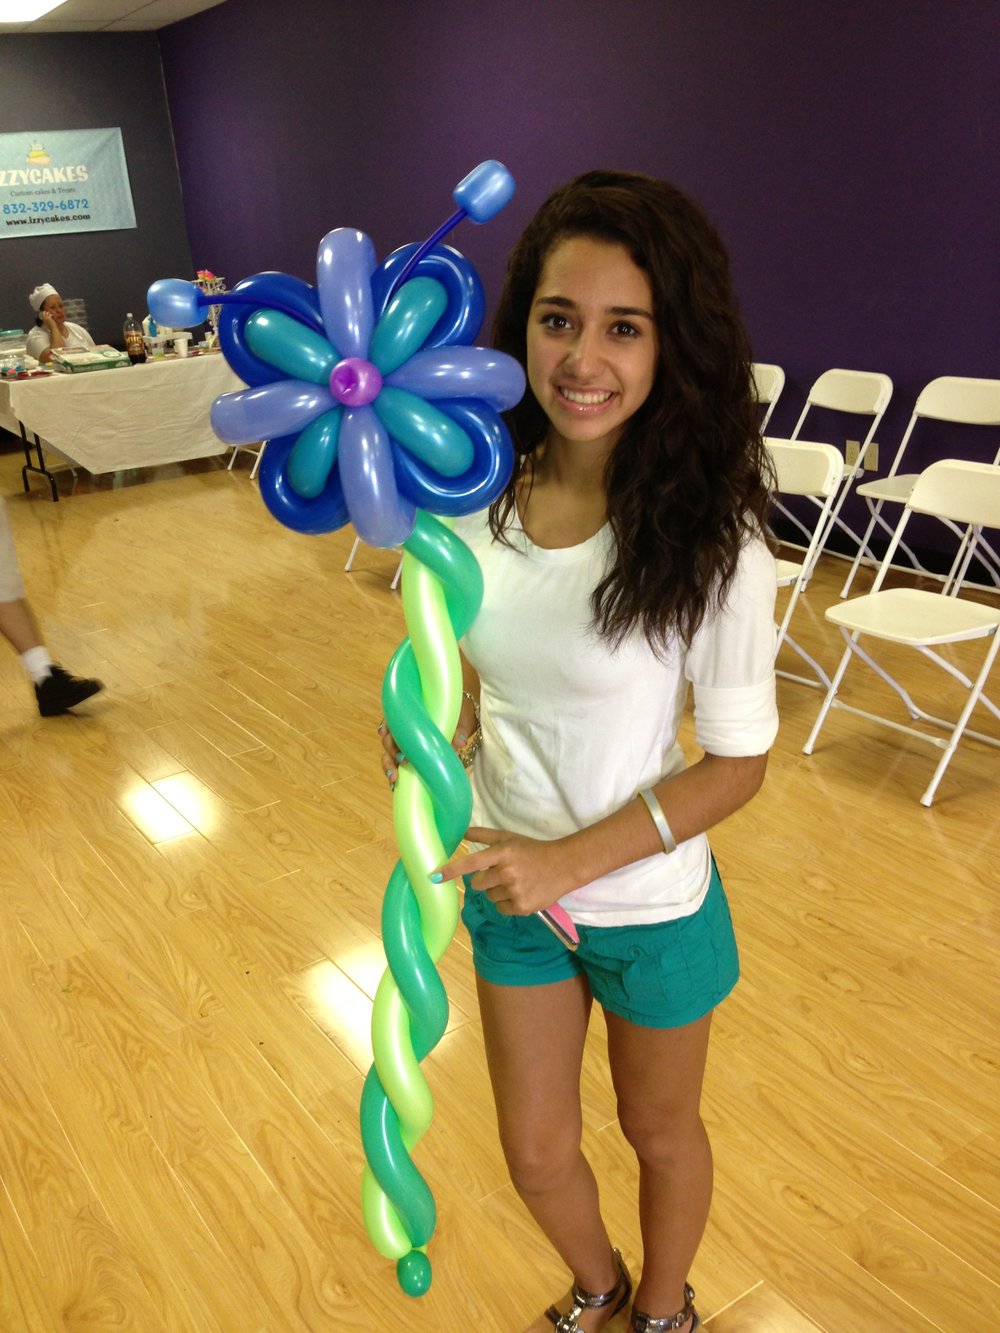 Neverland Balloons and Facepainting